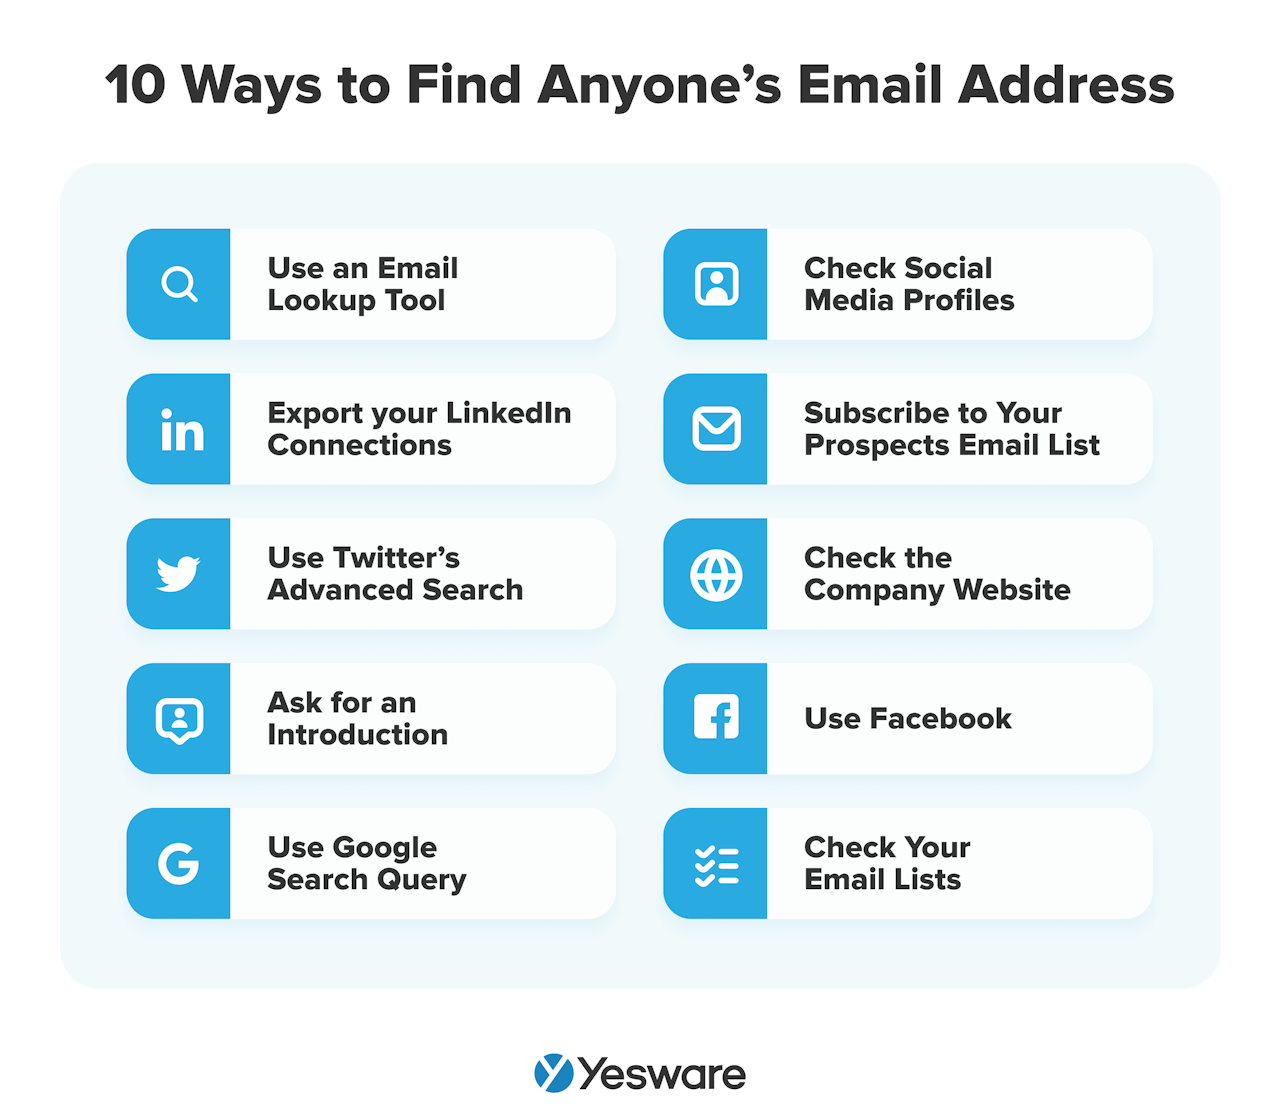 10 ways to find anyone's email address